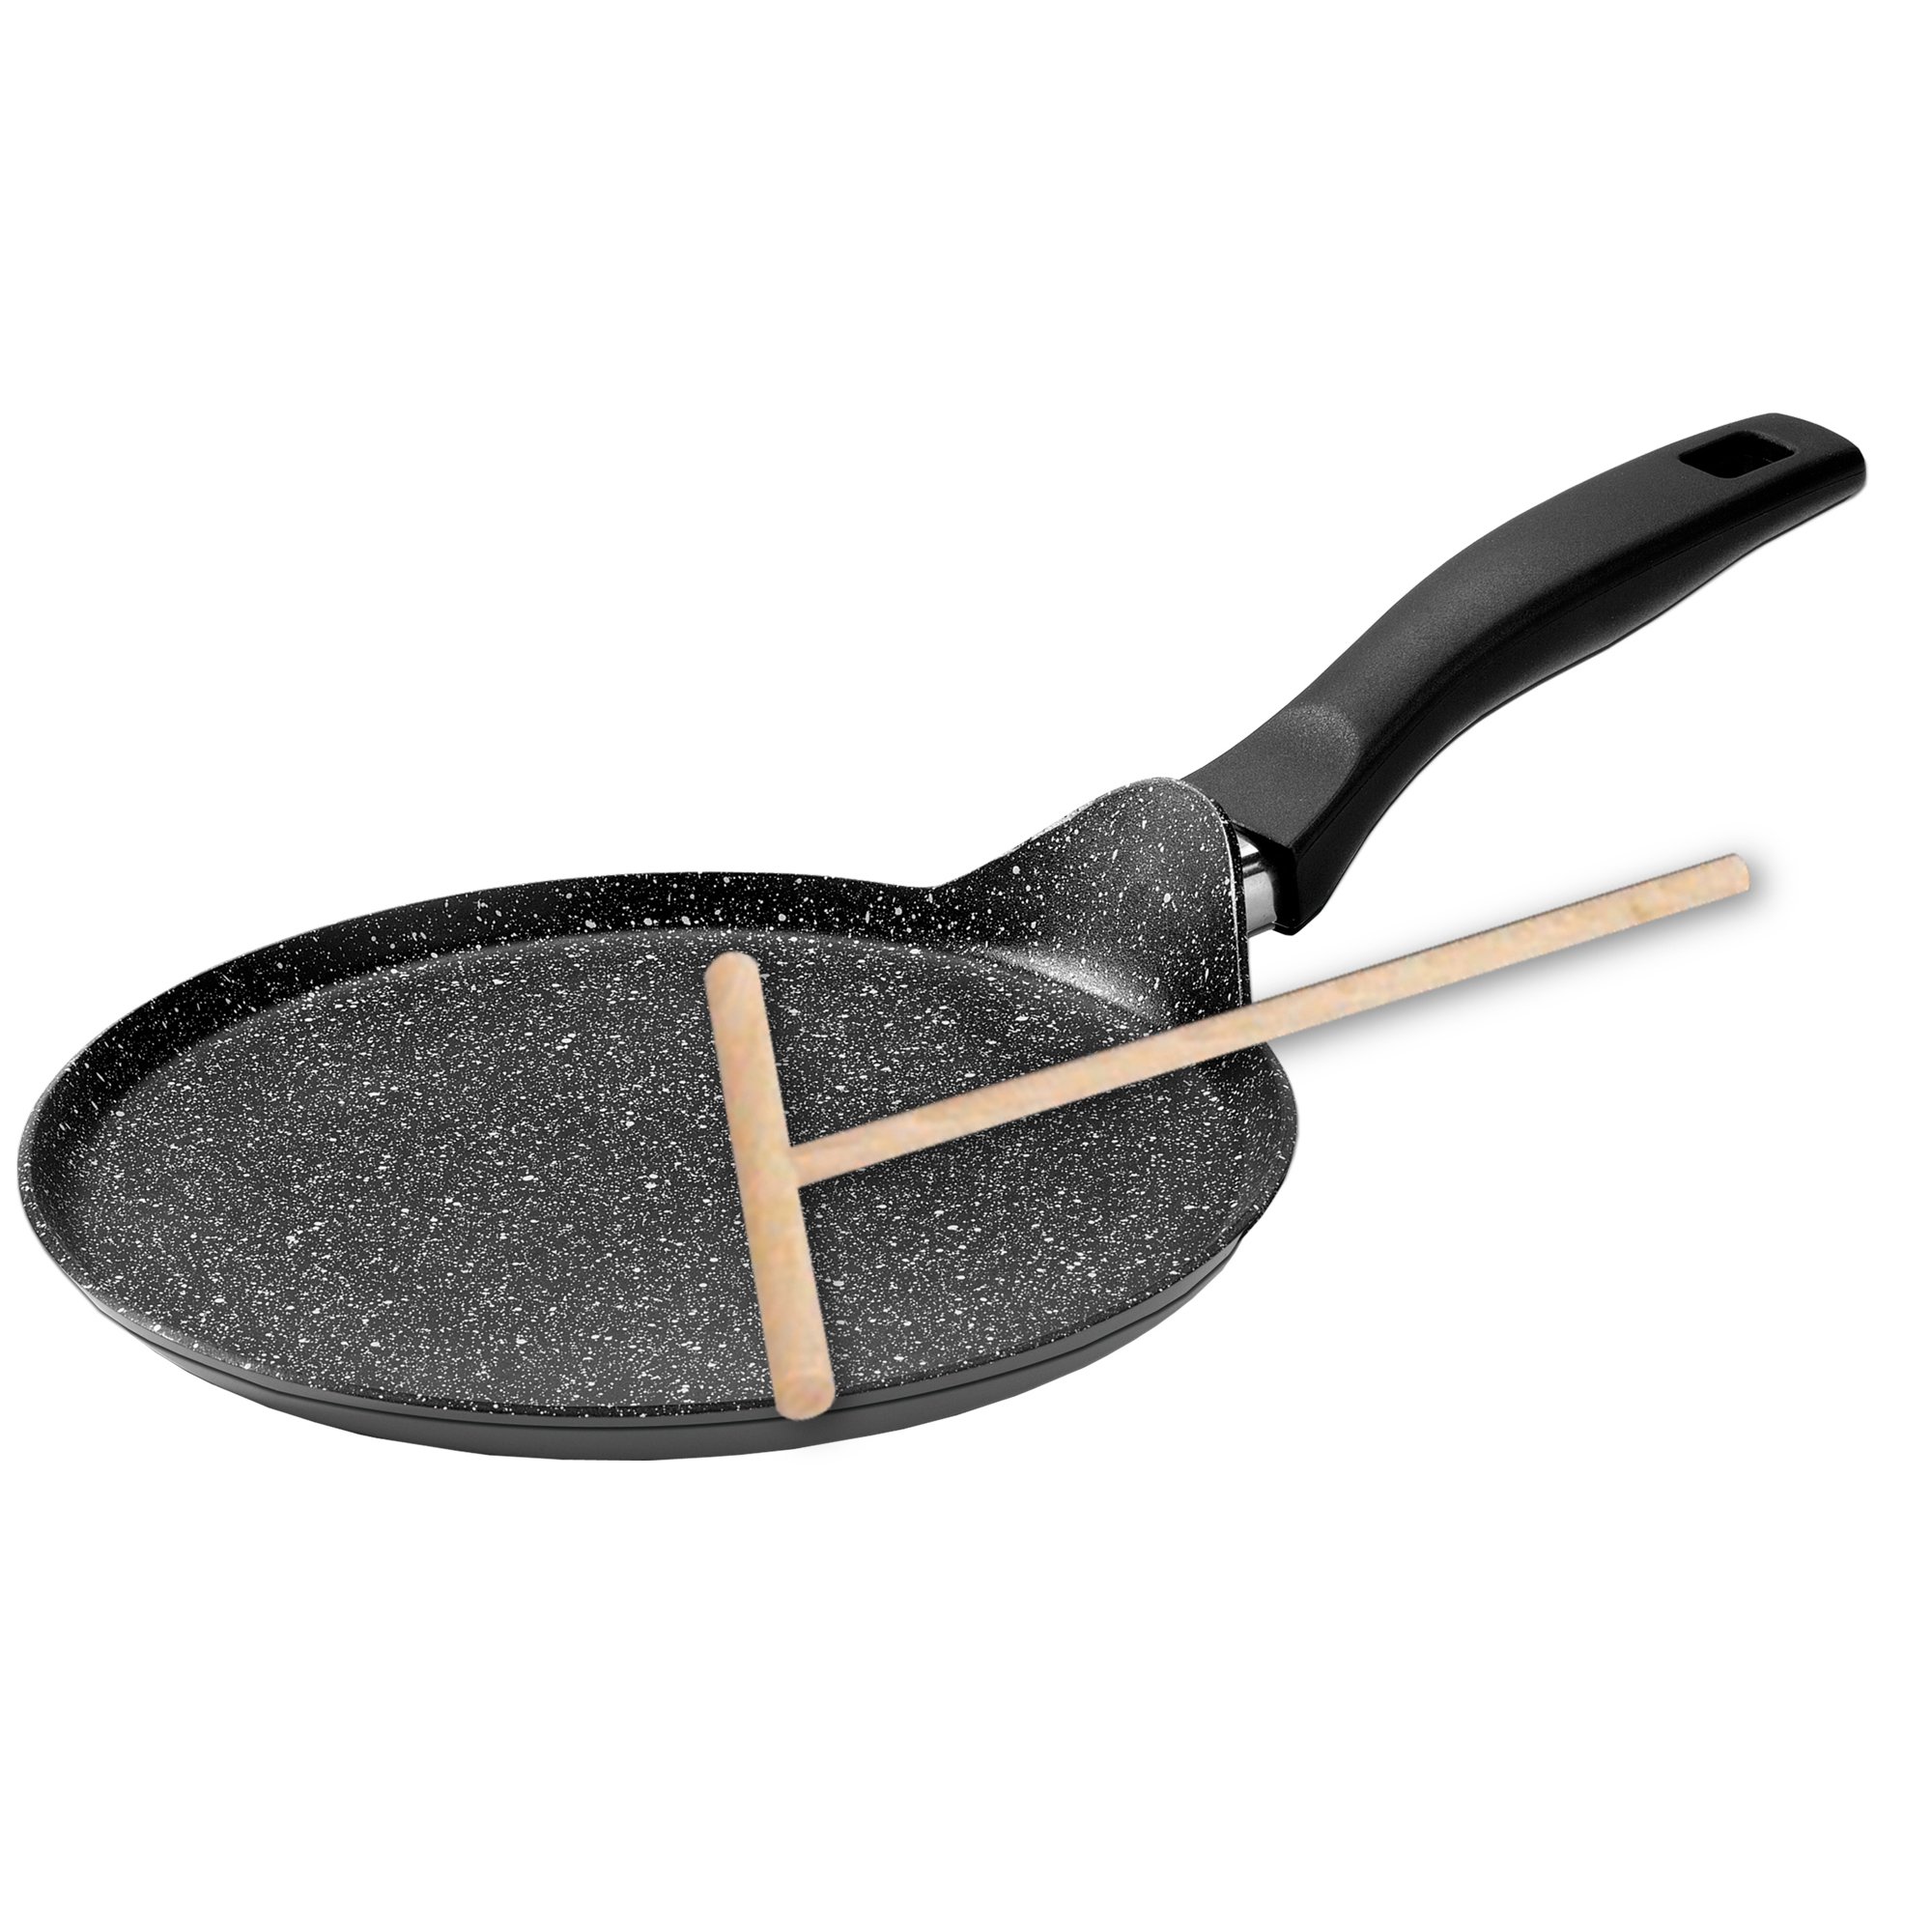 STONELINE® Classic Crêpes Pan 25 cm, pan non-stick coated with batter distributor, suitable for induction